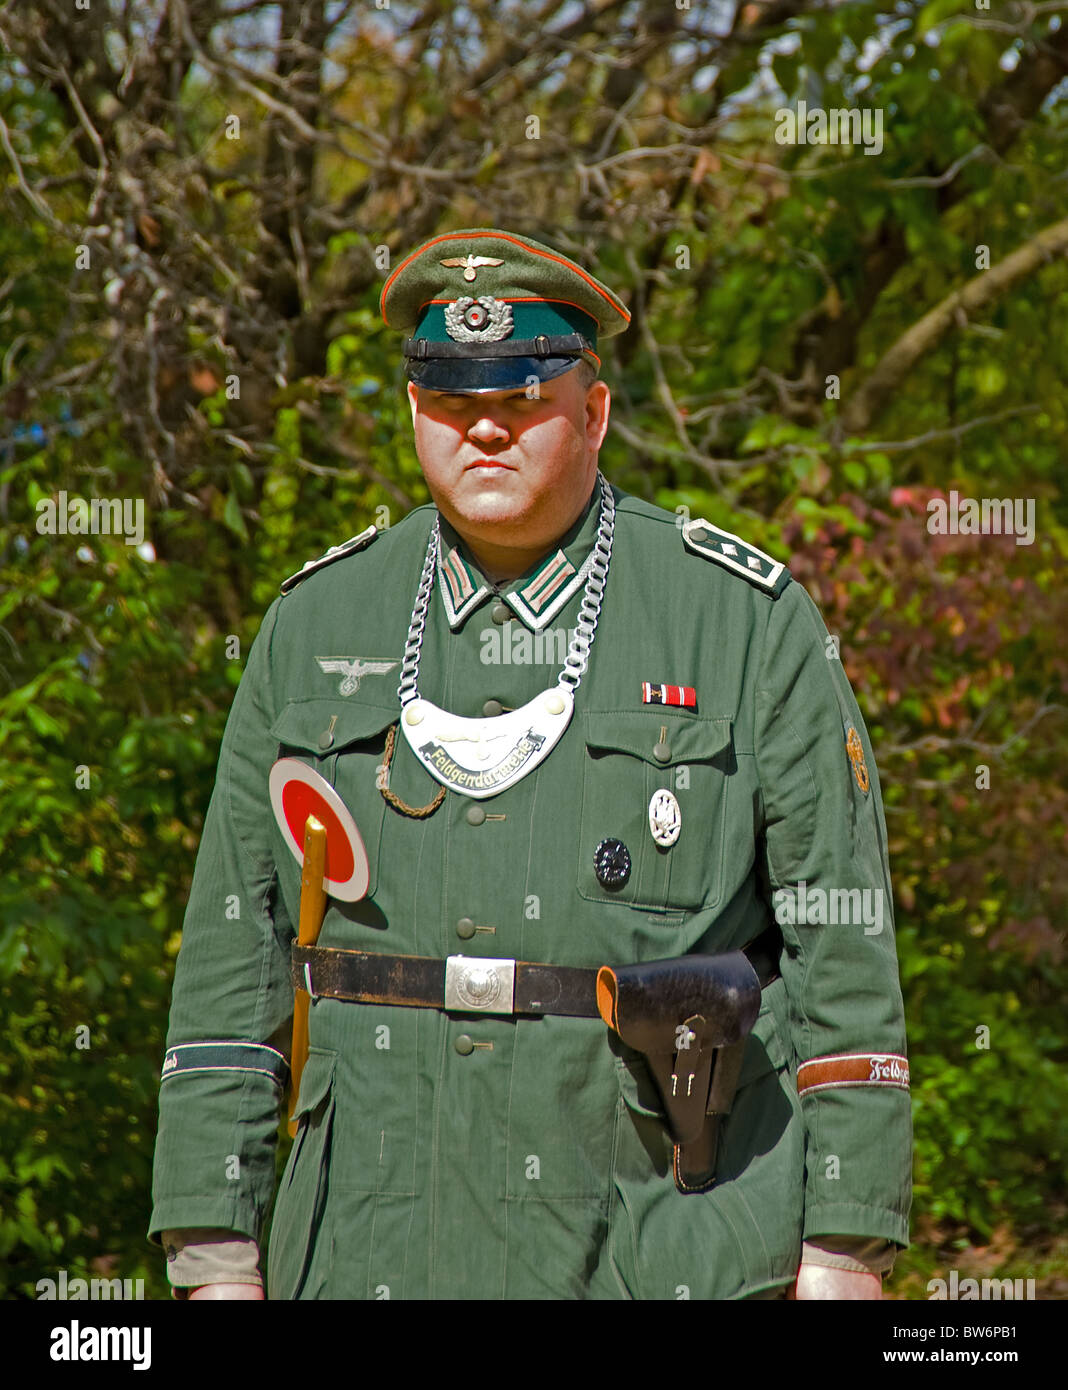 German army officer world war two 2 acting performance show traffic controller open air show Stock Photo